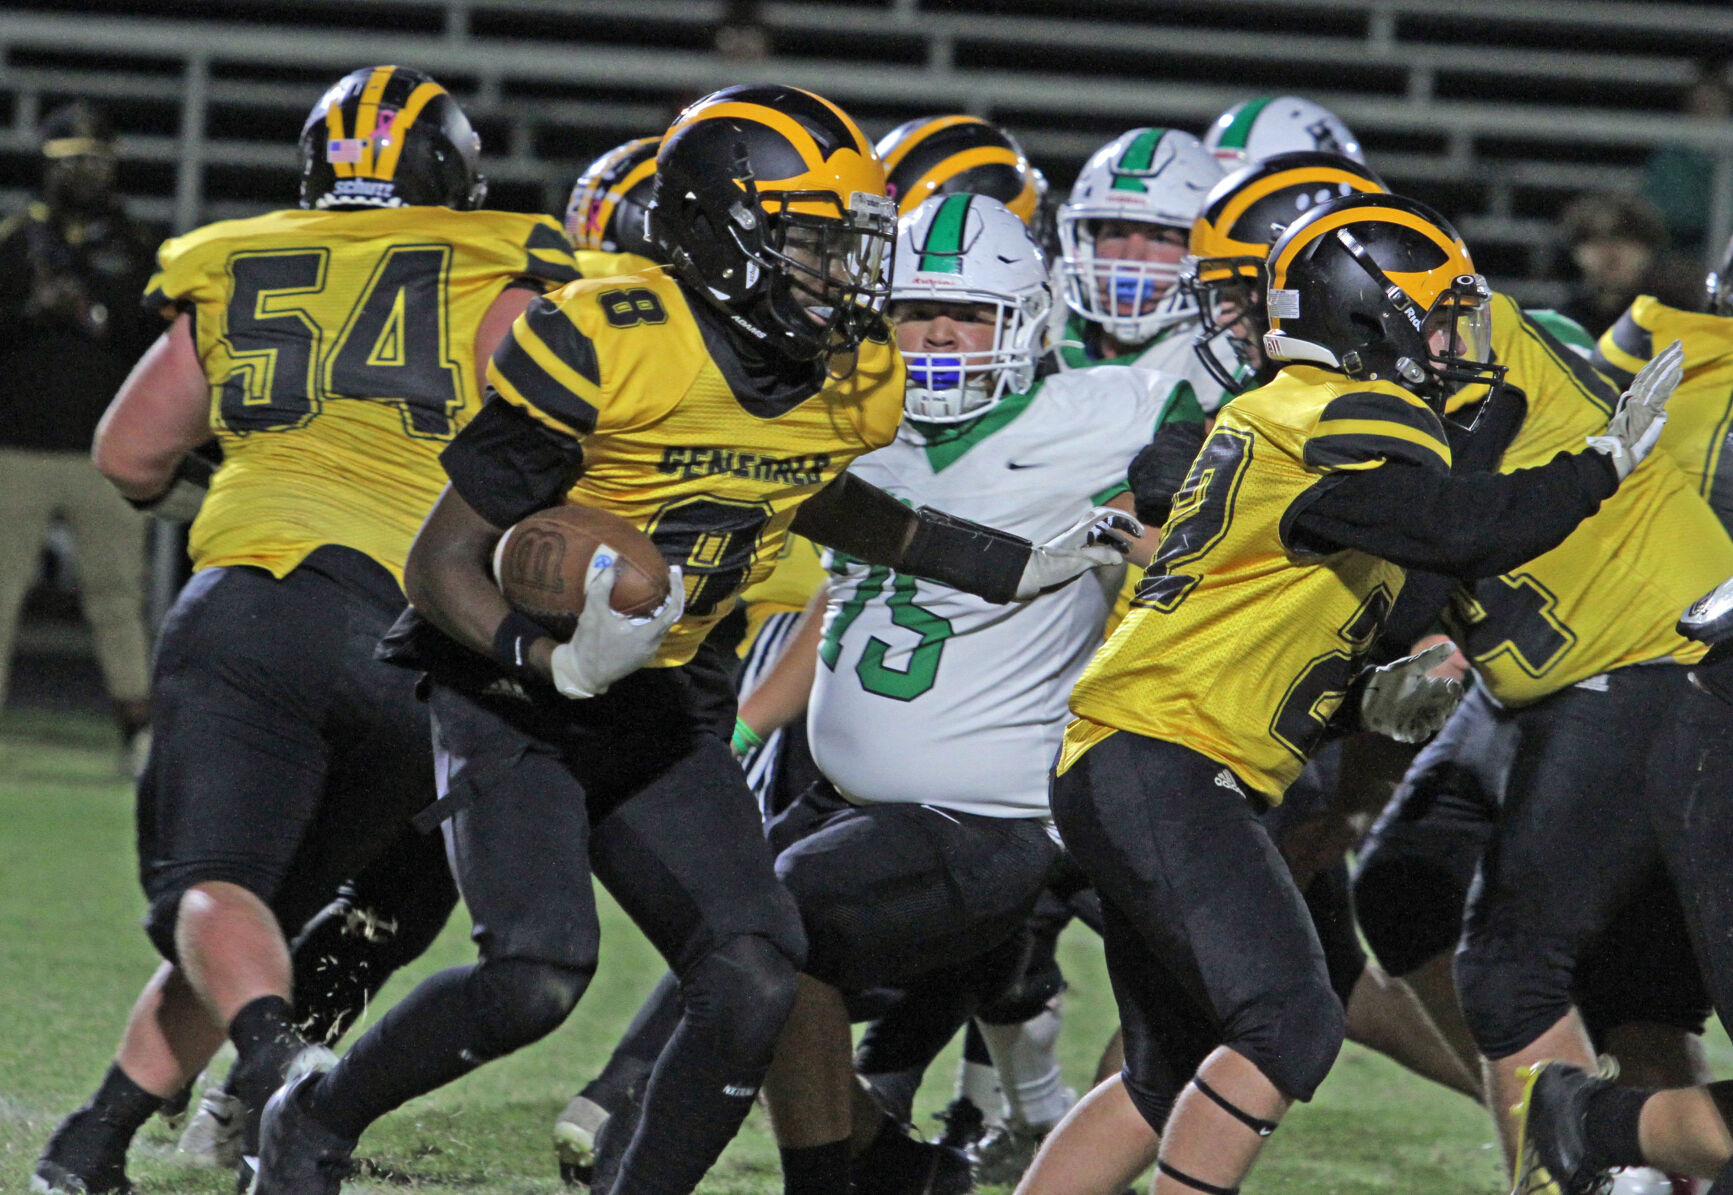 Triton Central Tigers Dominate Clarksville Generals with 41-6 Victory